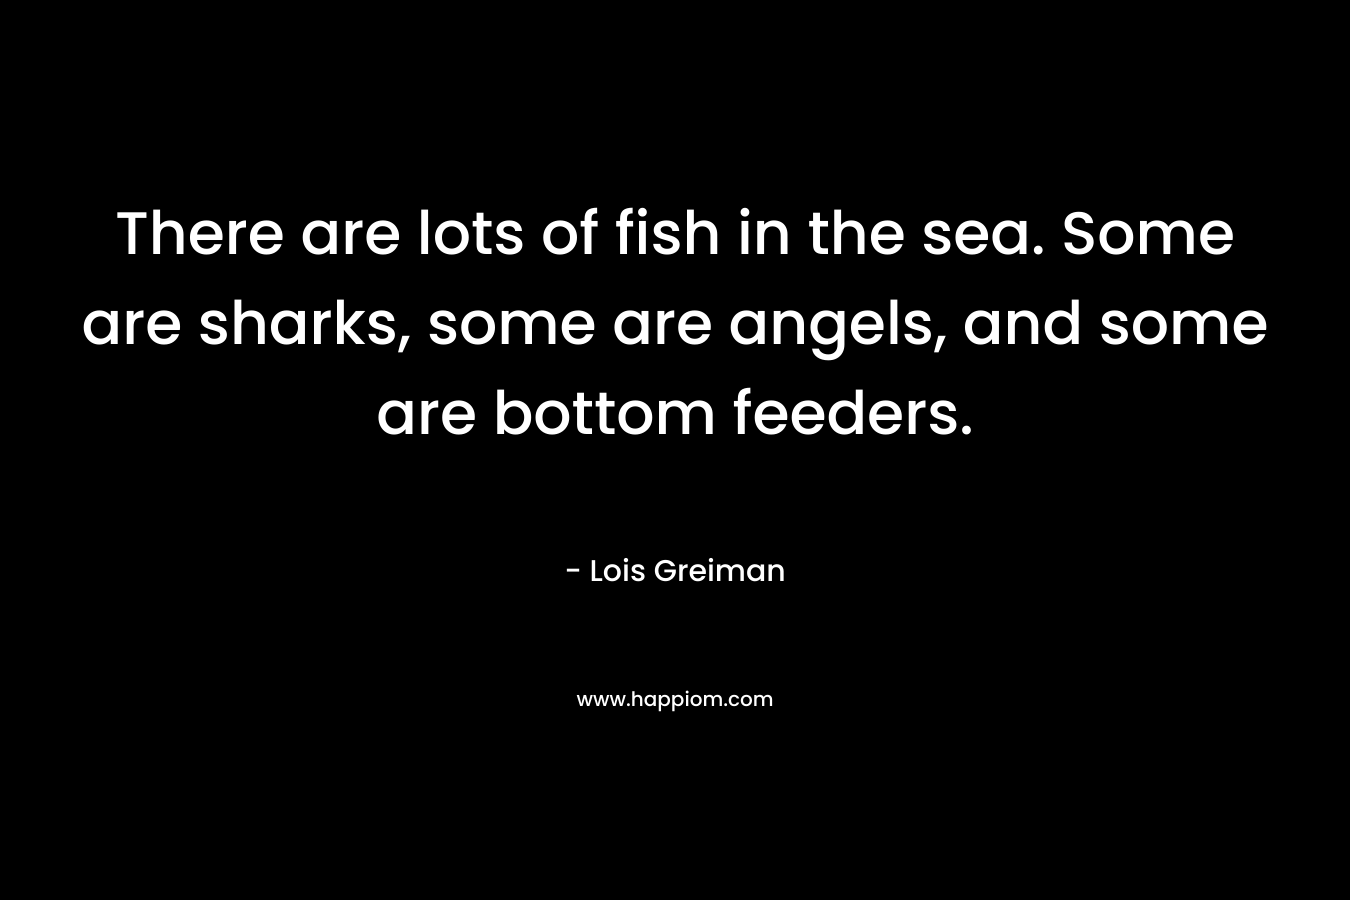 There are lots of fish in the sea. Some are sharks, some are angels, and some are bottom feeders.